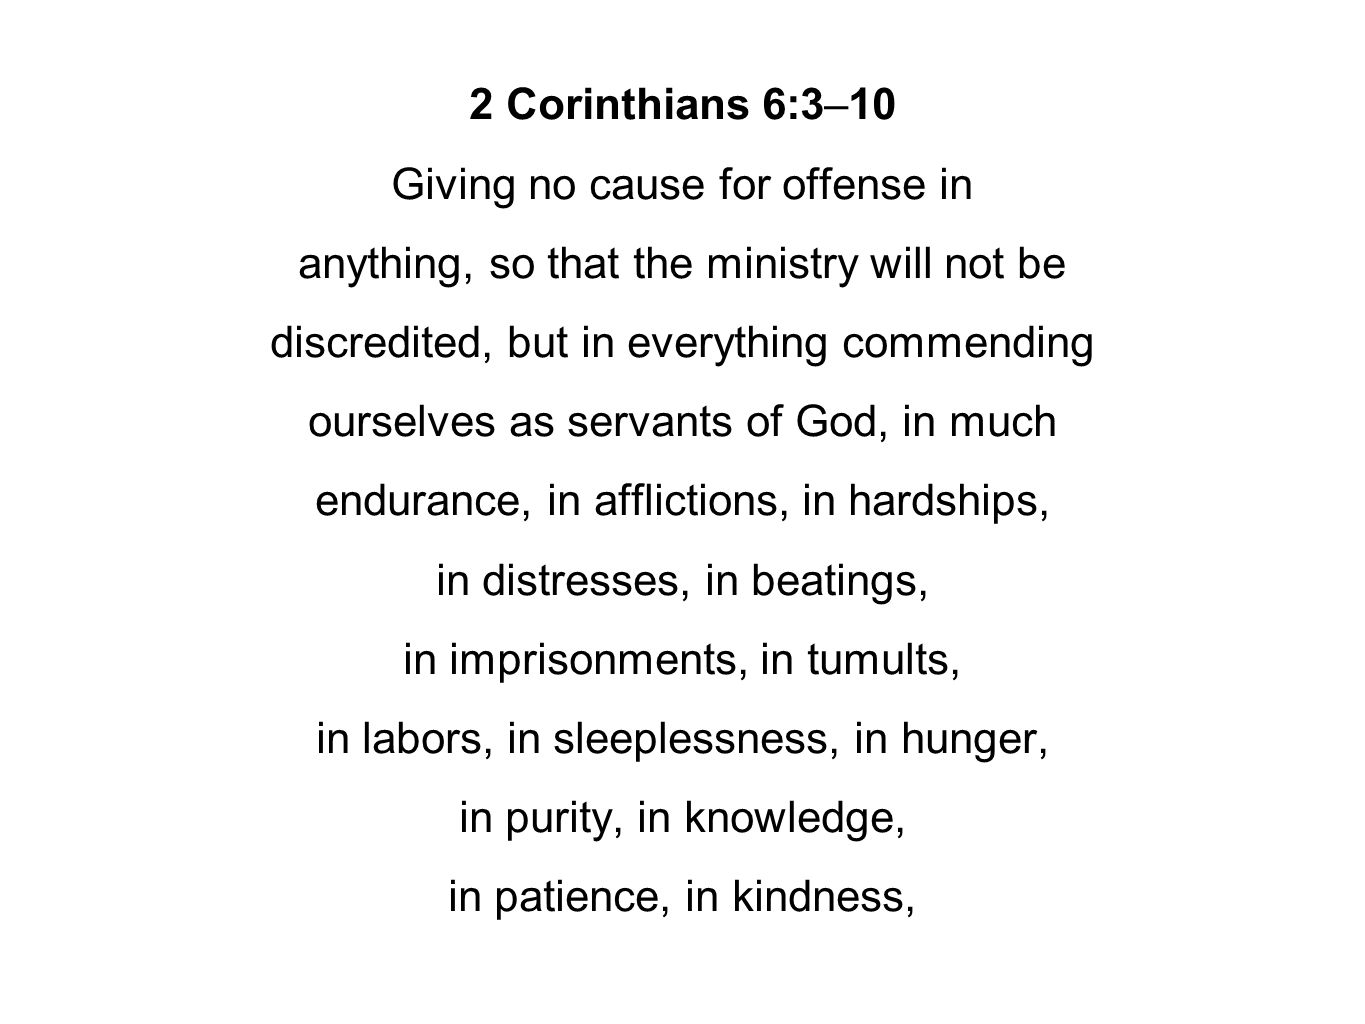 2 Corinthians 6:3–10 Giving no cause for offense in anything, so that the ministry will not be discredited, but in everything commending ourselves as servants of God, in much endurance, in afflictions, in hardships, in distresses, in beatings, in imprisonments, in tumults, in labors, in sleeplessness, in hunger, in purity, in knowledge, in patience, in kindness,